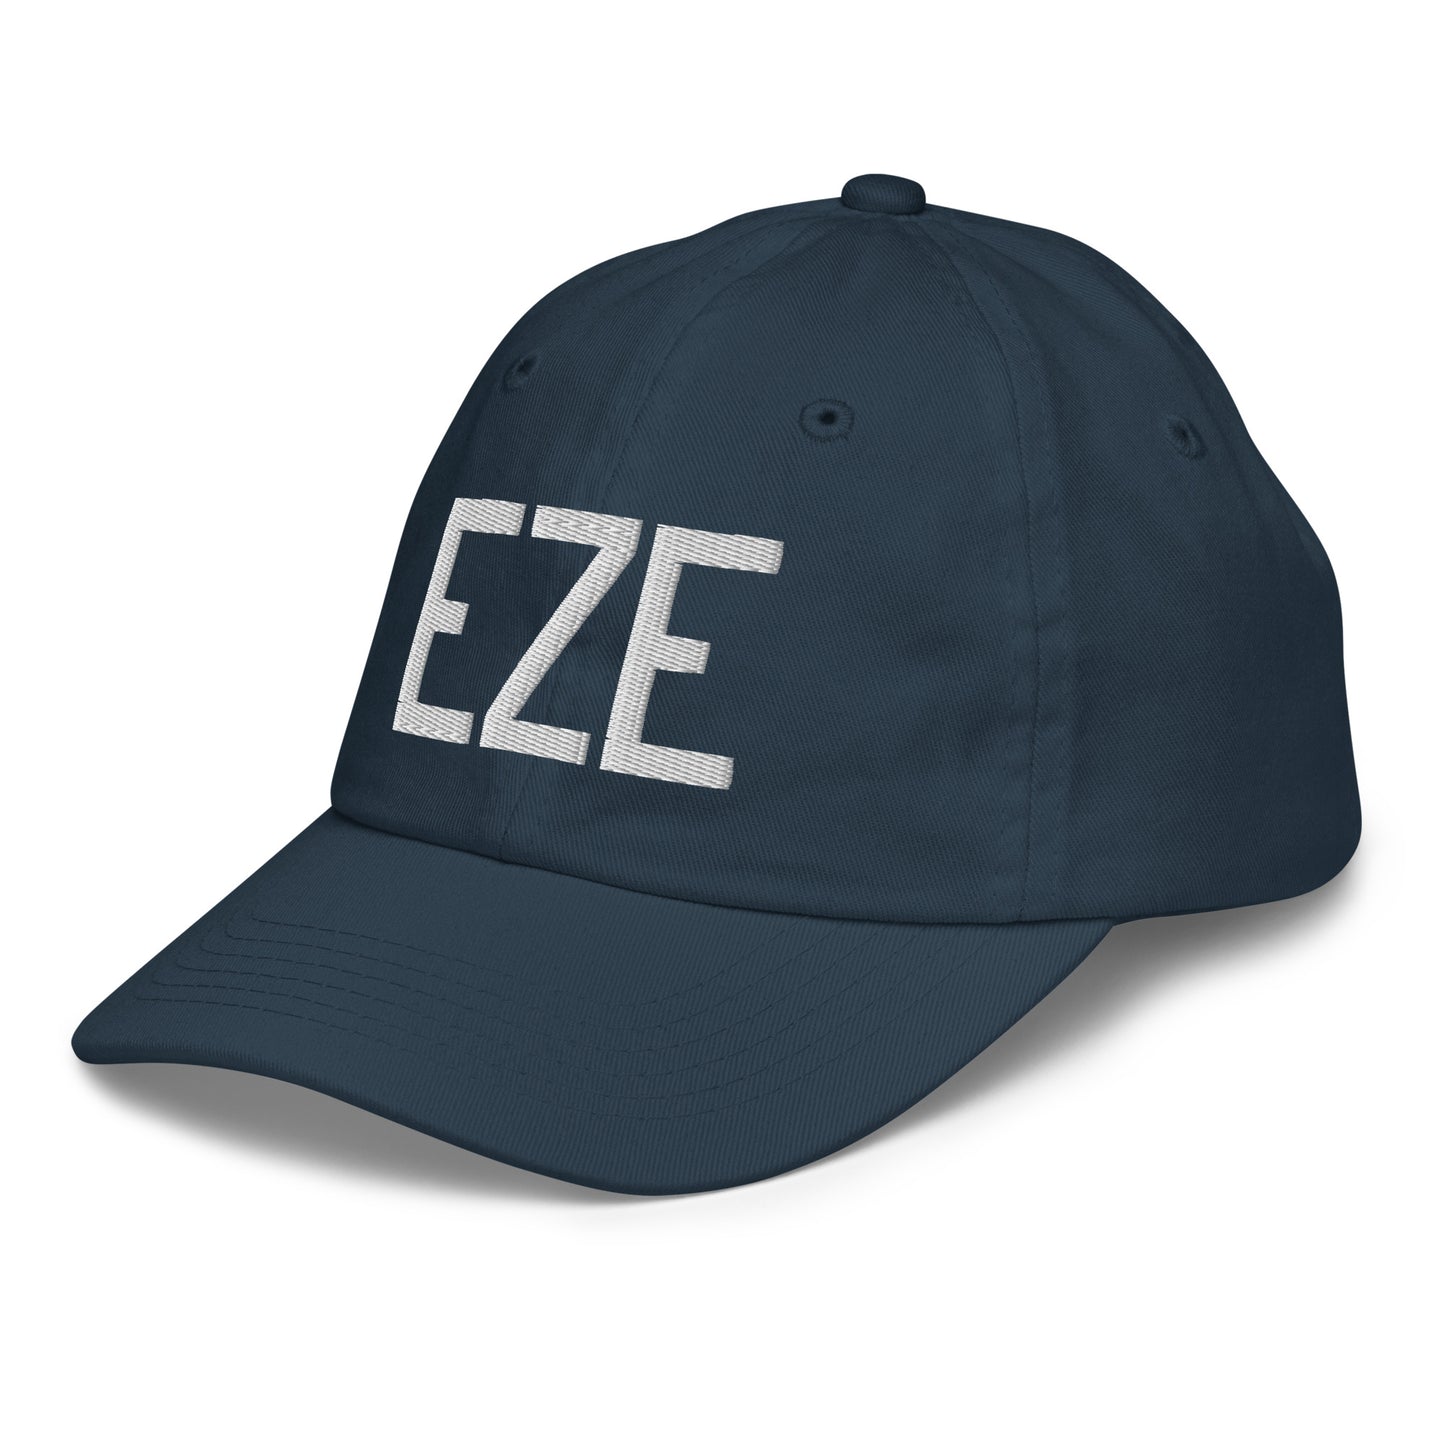 Airport Code Kid's Baseball Cap - White • EZE Buenos Aires • YHM Designs - Image 16